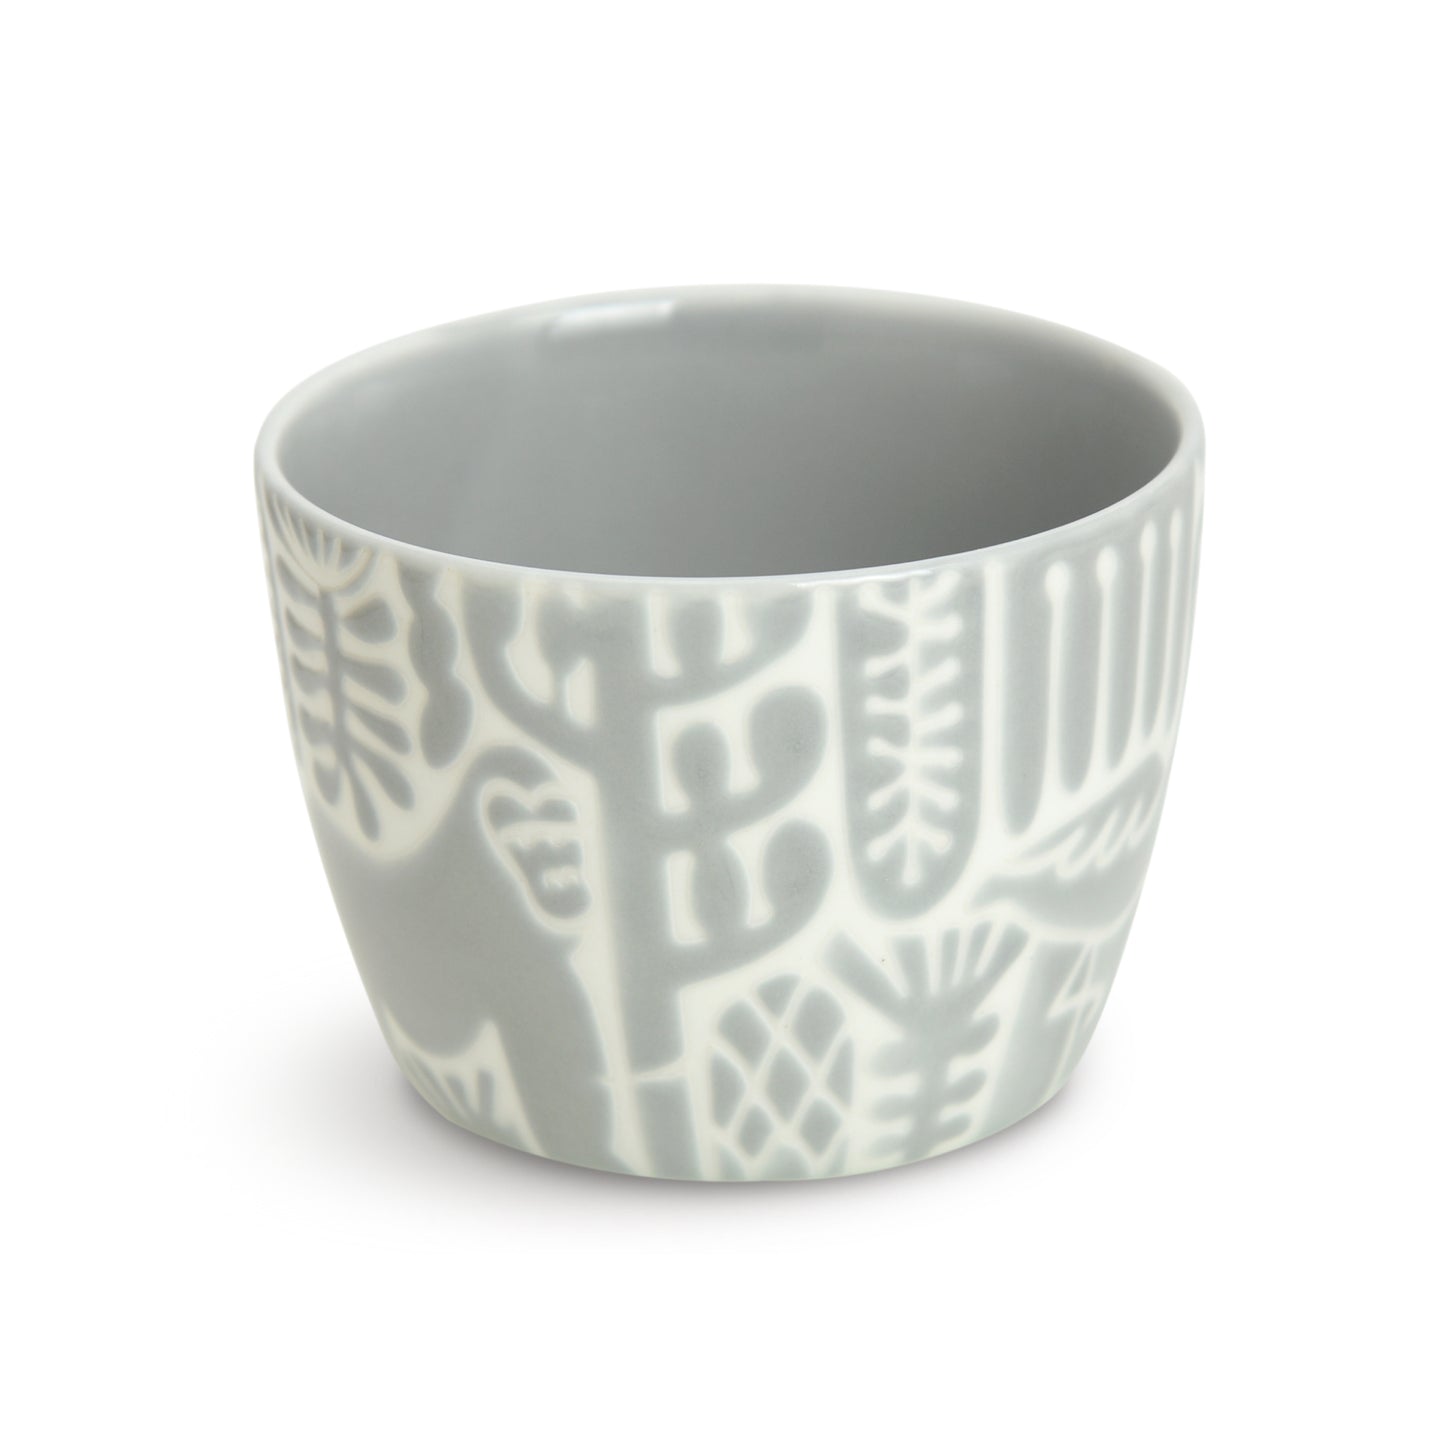 [natural69] [Utopia] [Cup] Hasami Ware Natural 69 Buckwheat Soba Mouth Free Cup Rock Cup Animal Pattern Fashionable Adult Colorful Cute